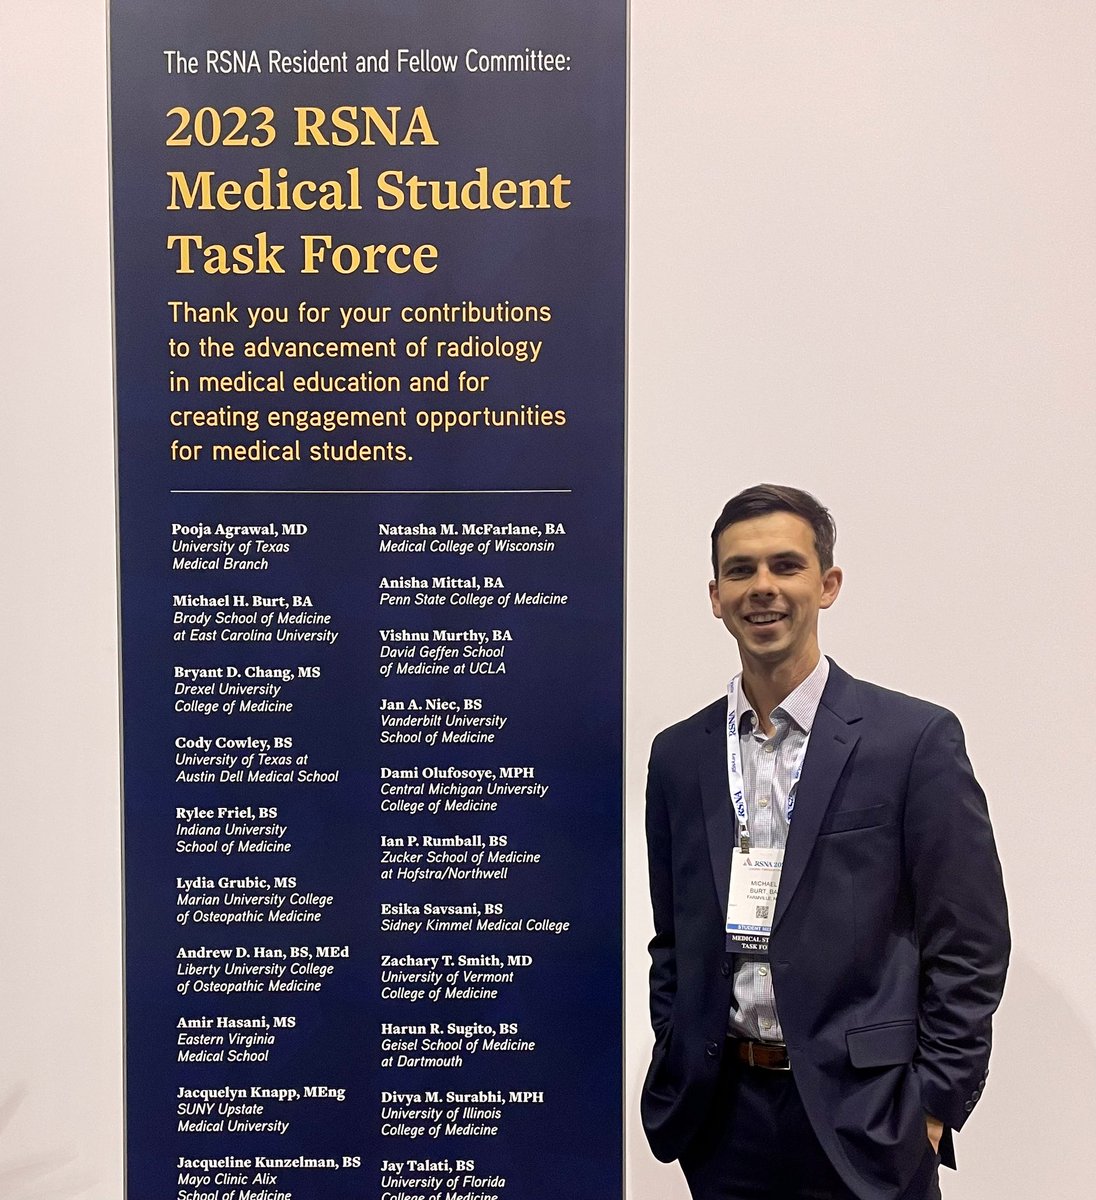 My second time attending RSNA was even better than the first! 

Until next time, Chicago ✌🏻

#RSNA23